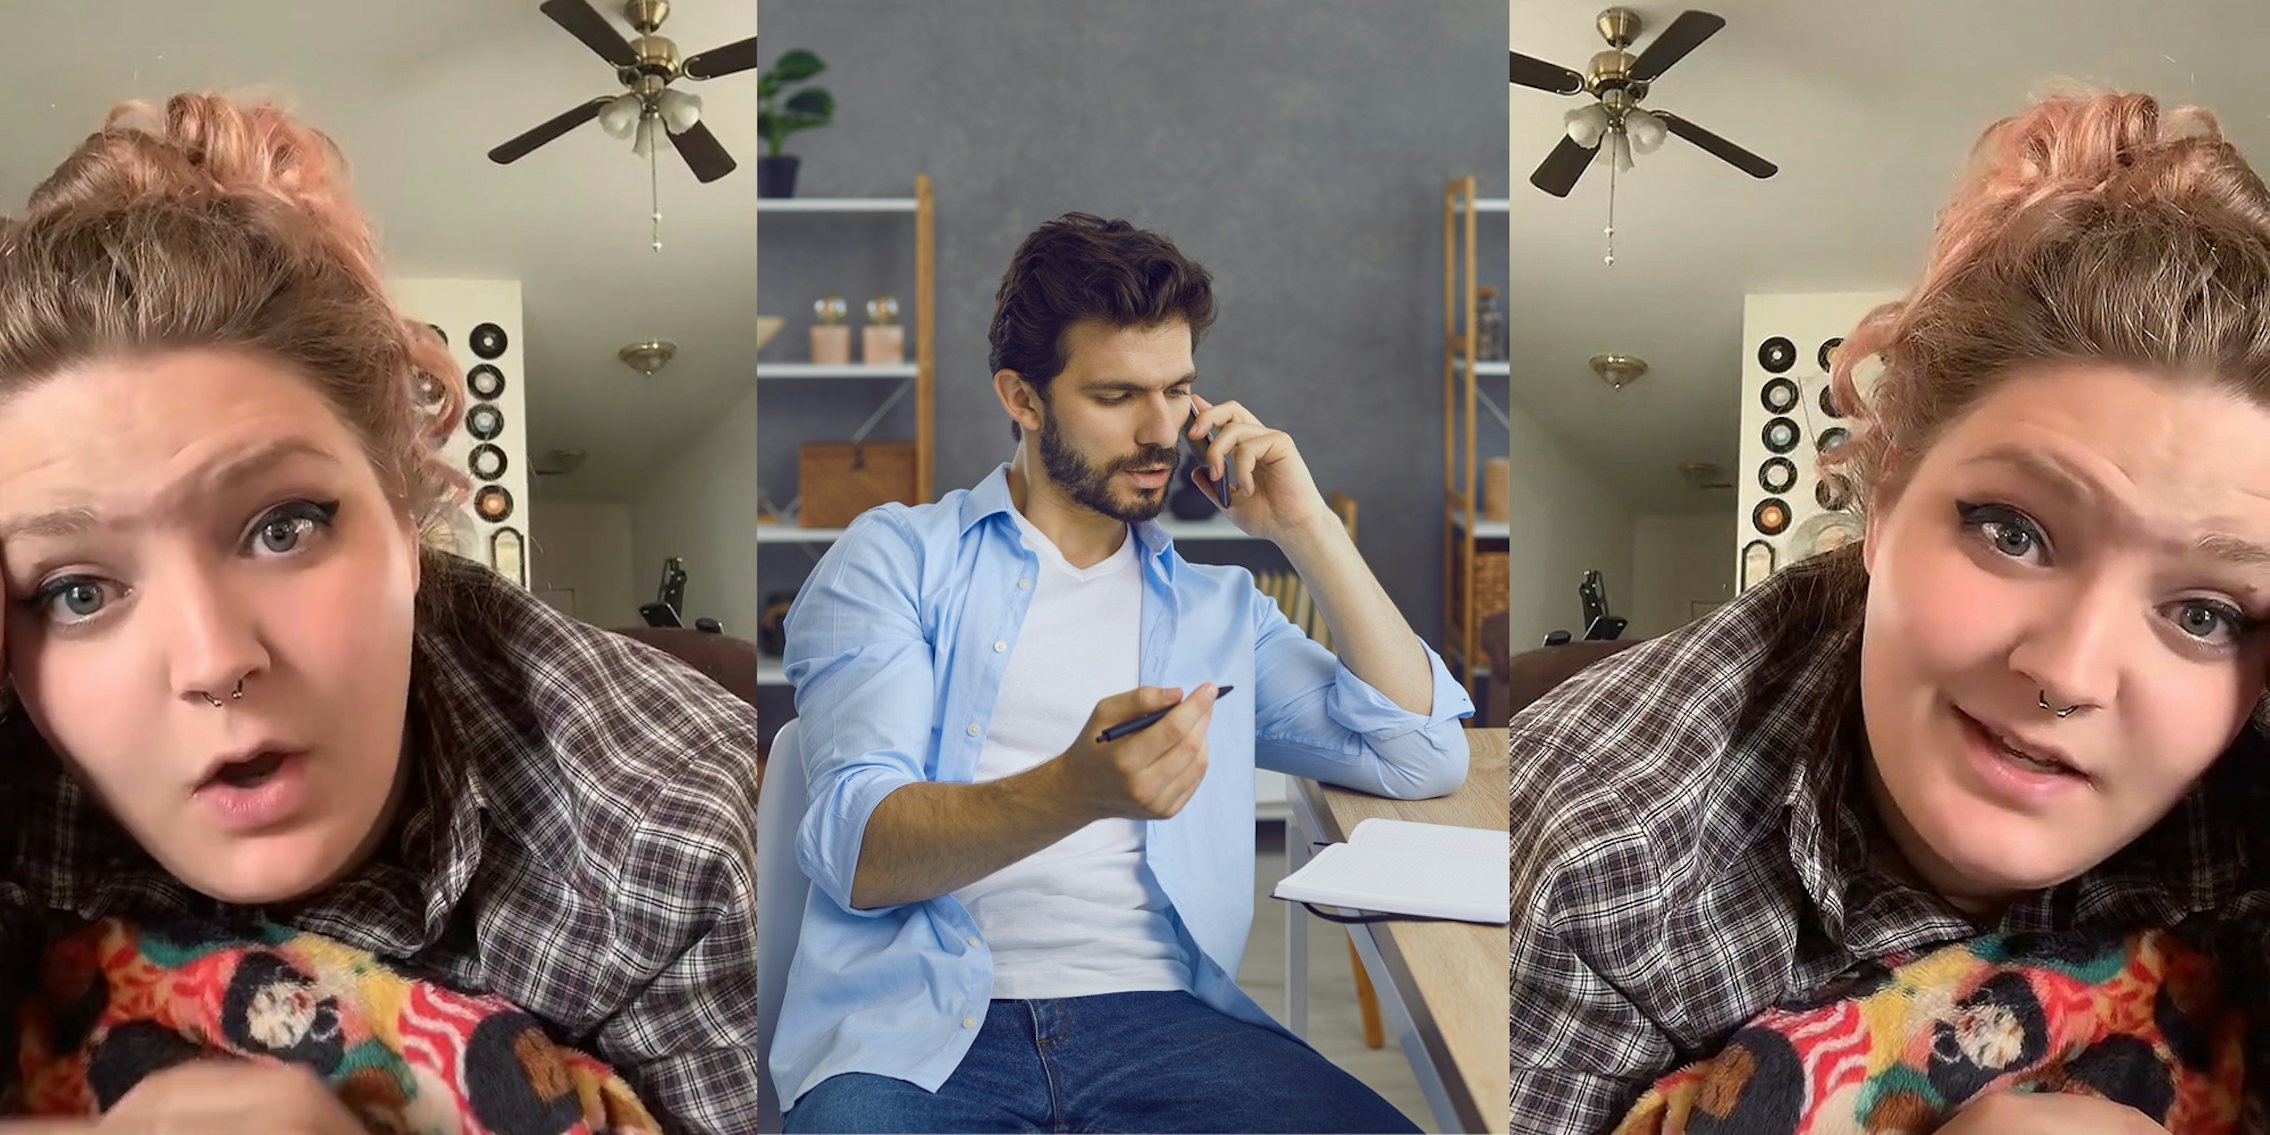 woman speaking head tilted left (l) man at desk phone up to ear pen in hand (c) woman speaking head tilted right (r)